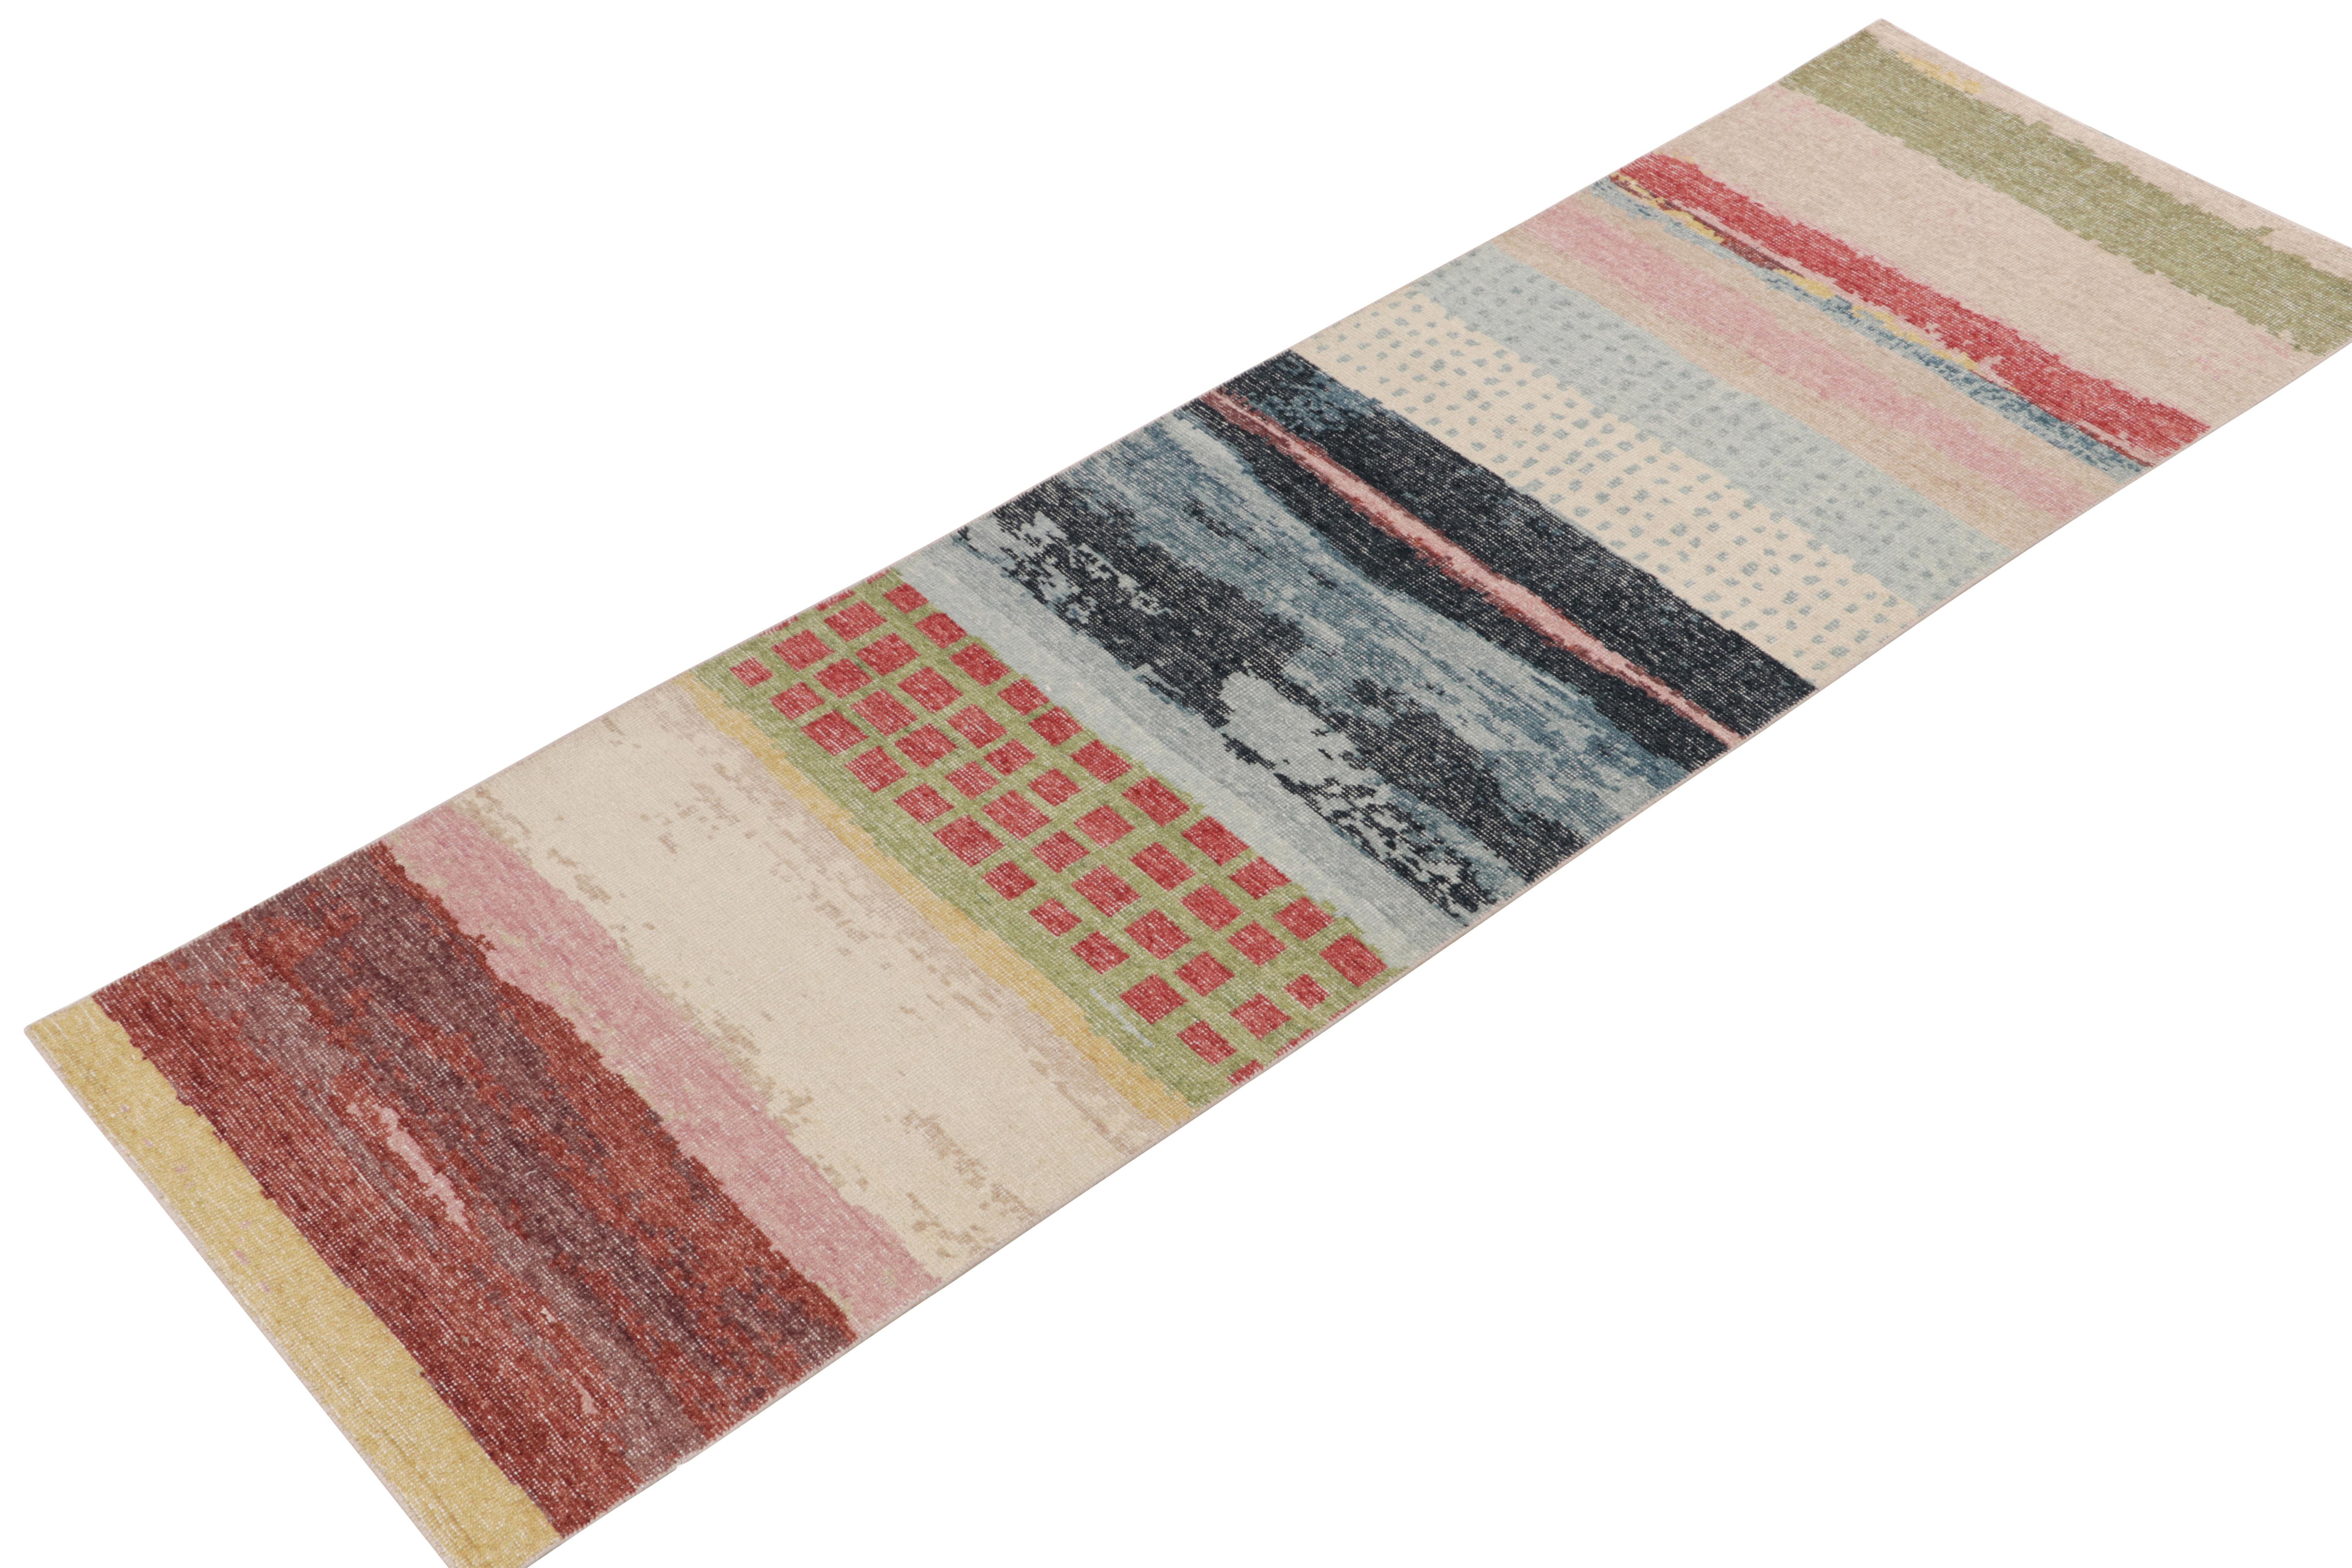 Hand-knotted in wool, a 3x10 runner from Rug & Kilim’s Homage collection. 

On the Design: The pattern enjoys brilliant pagination in an enticing color play of variegated shades in blue, red, green & pastel pink; uniquely complementing the